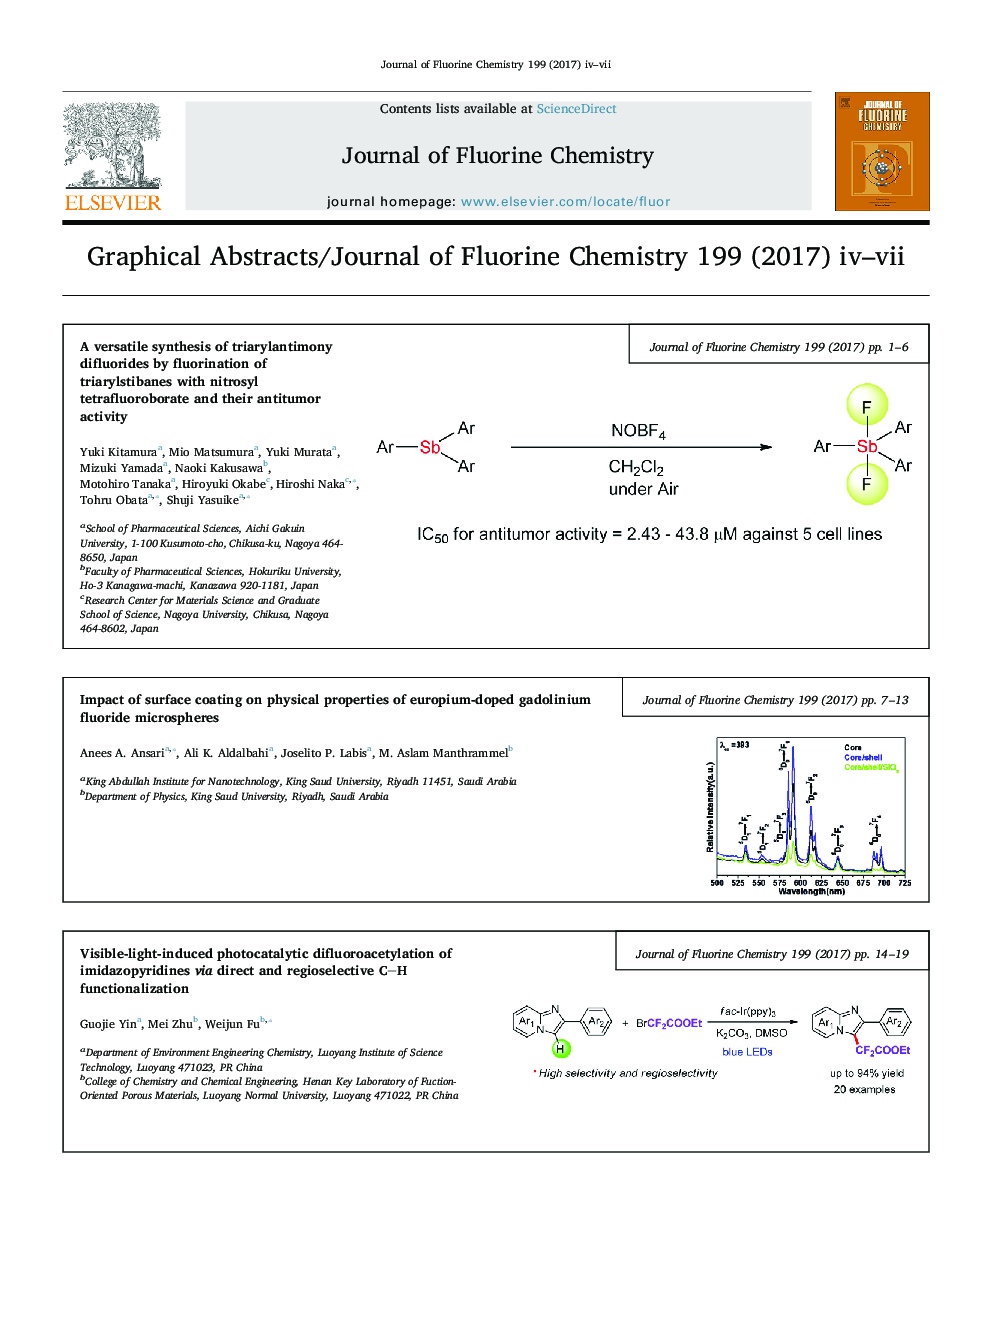 Graphical Abstracts/Journal of Fluorine Chemistry 199 (2017) iv-vii